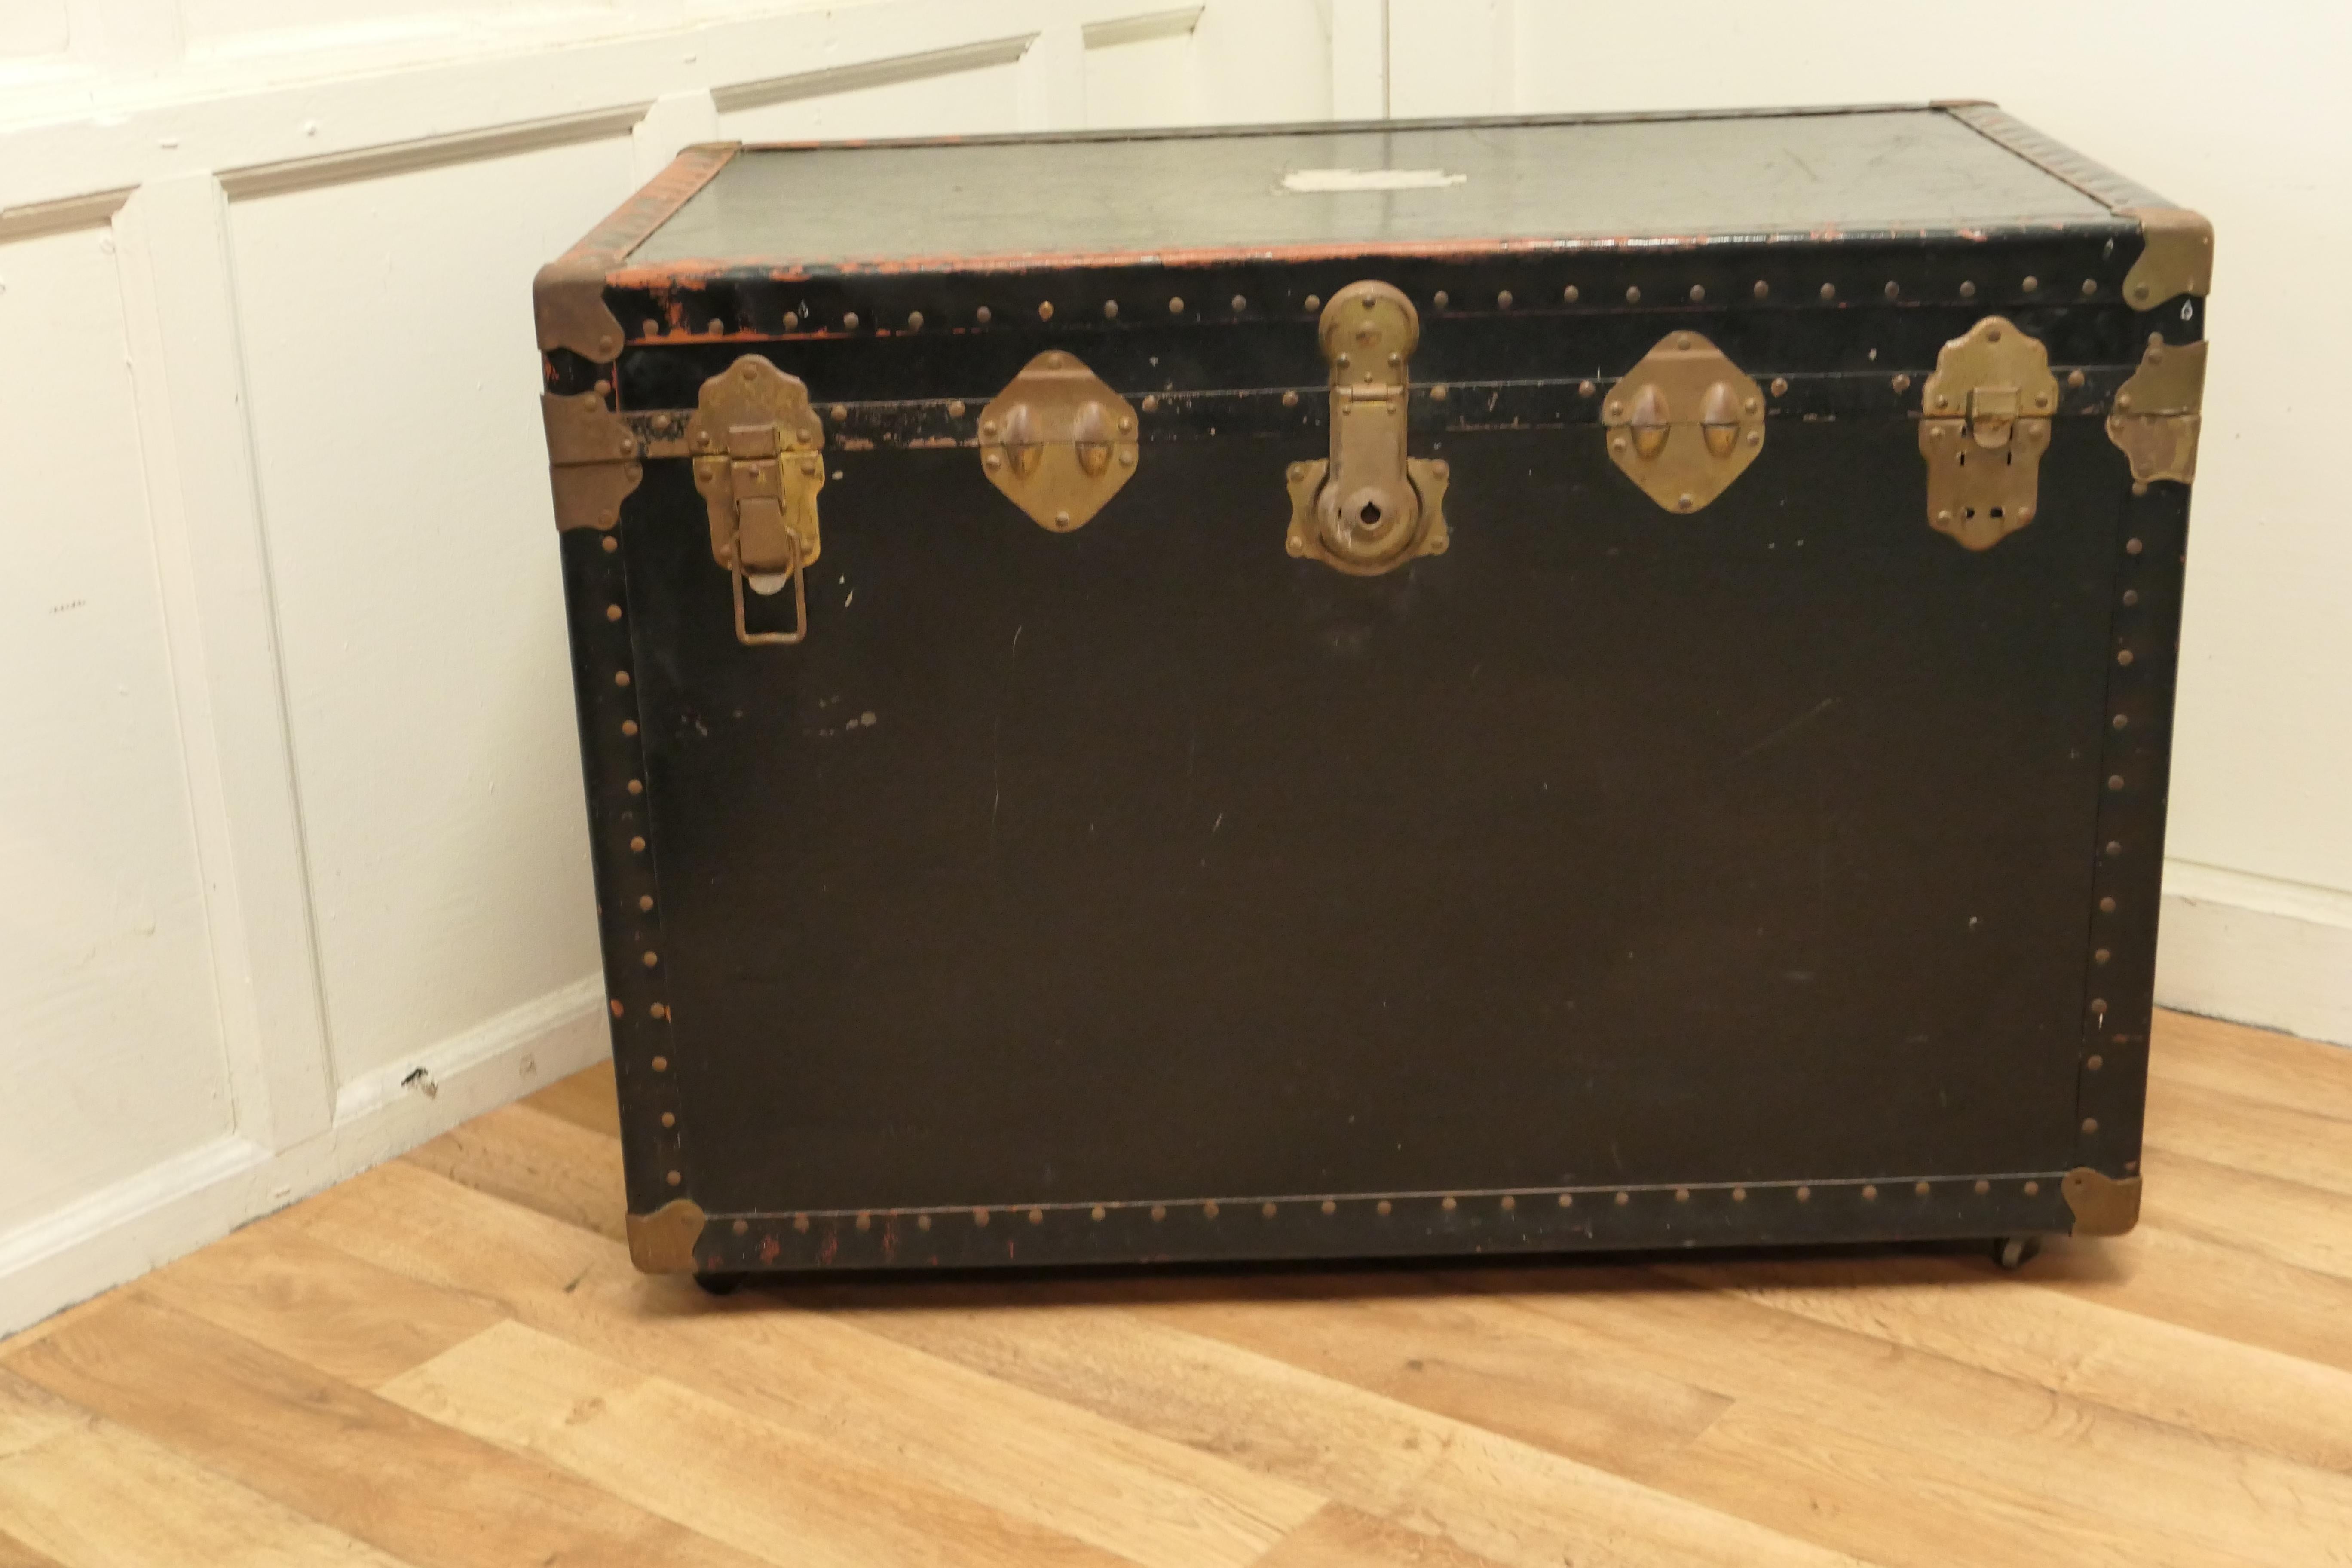 Large vintage rigid canvas travel trunk, steamer trunk on wheels.

A very useful decorative travel trunk, it is lined in linen fabric, it has one leather carrying handles, and one stronger metal handle.
The Trunk is canvas covered, with metal